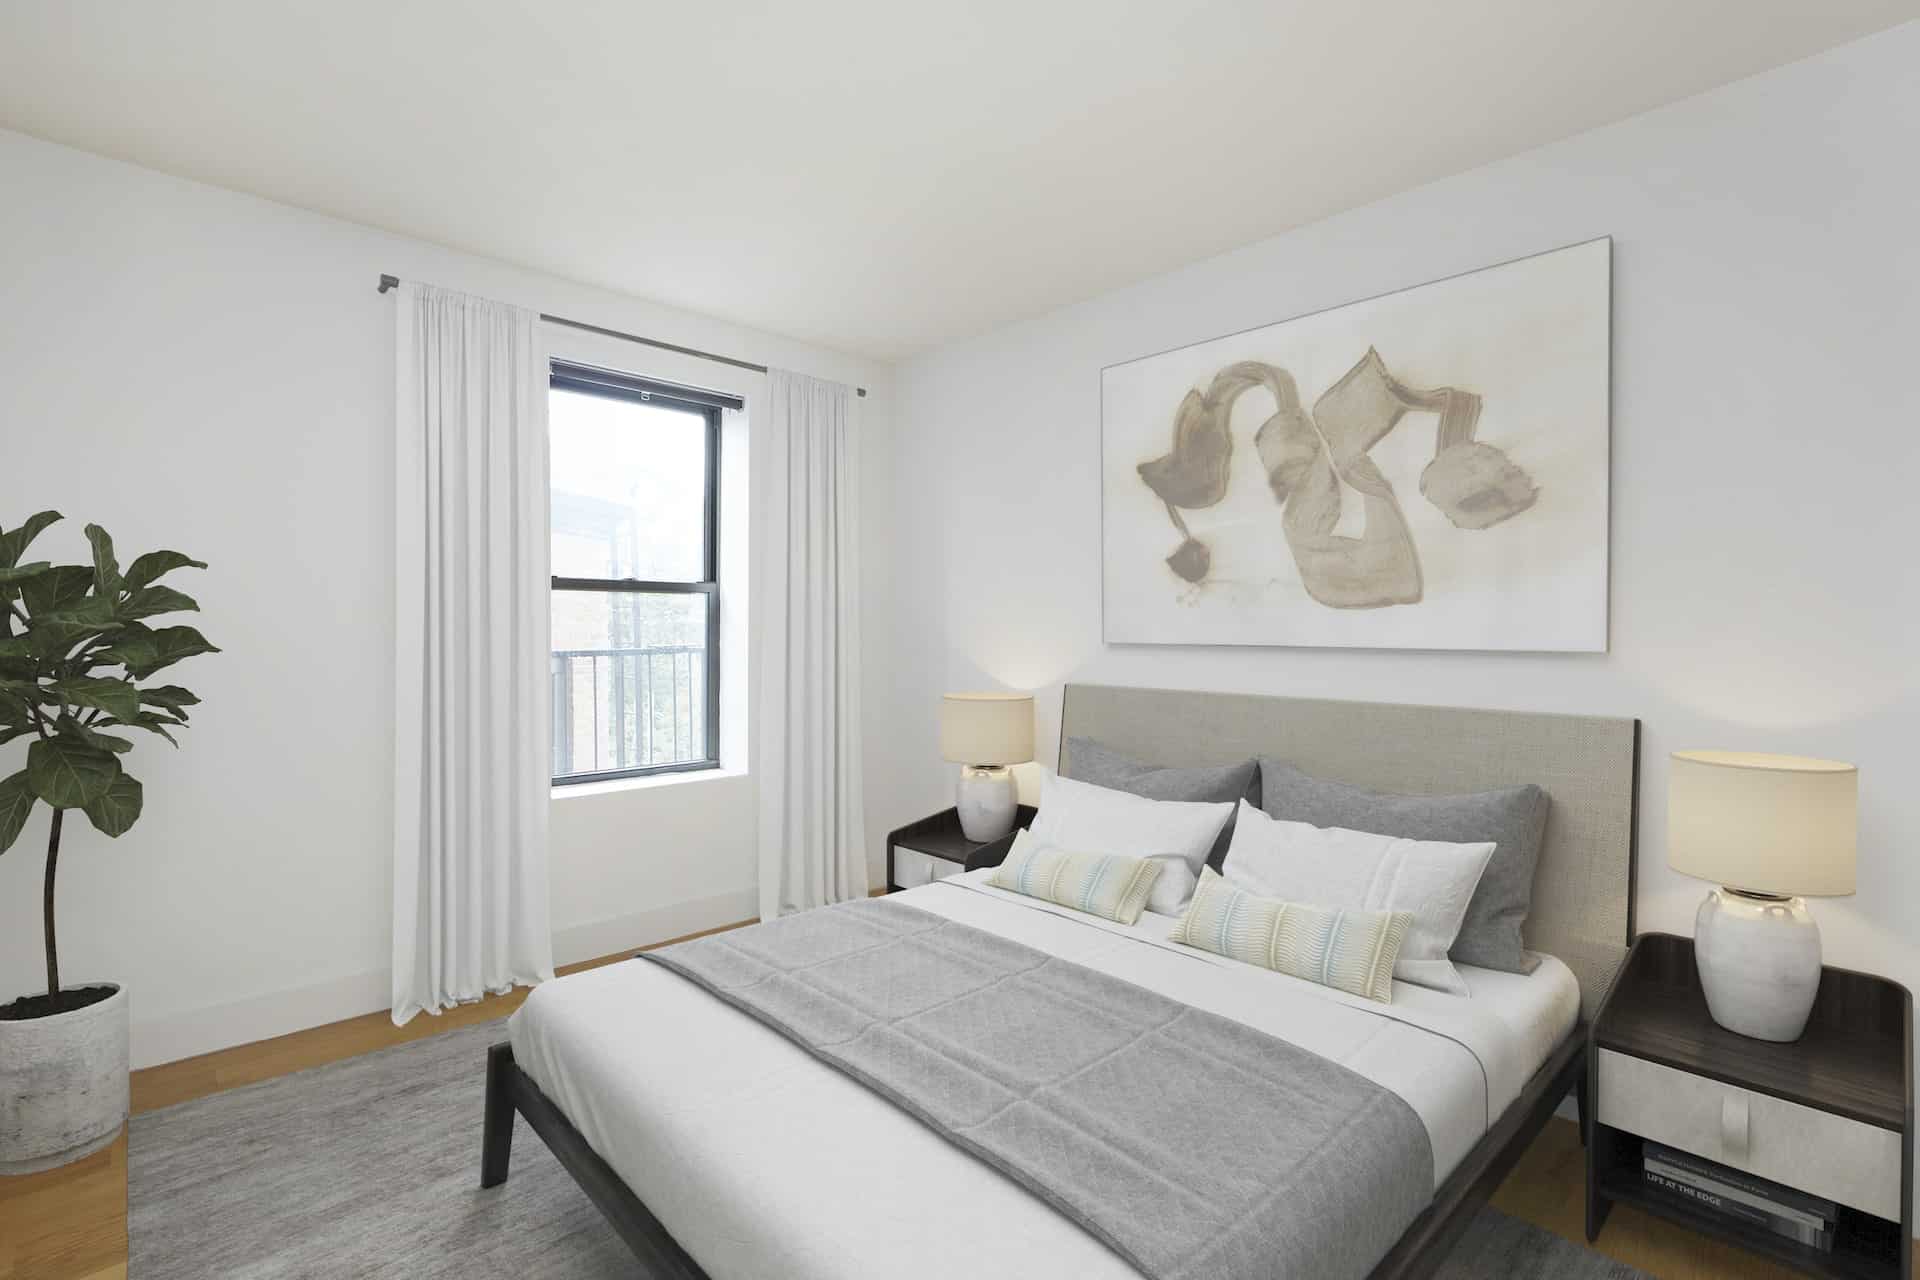 Bedroom at 457 15th Street apartments in Brooklyn with a queen size bed, matching side tables, a window and hardwood floors.